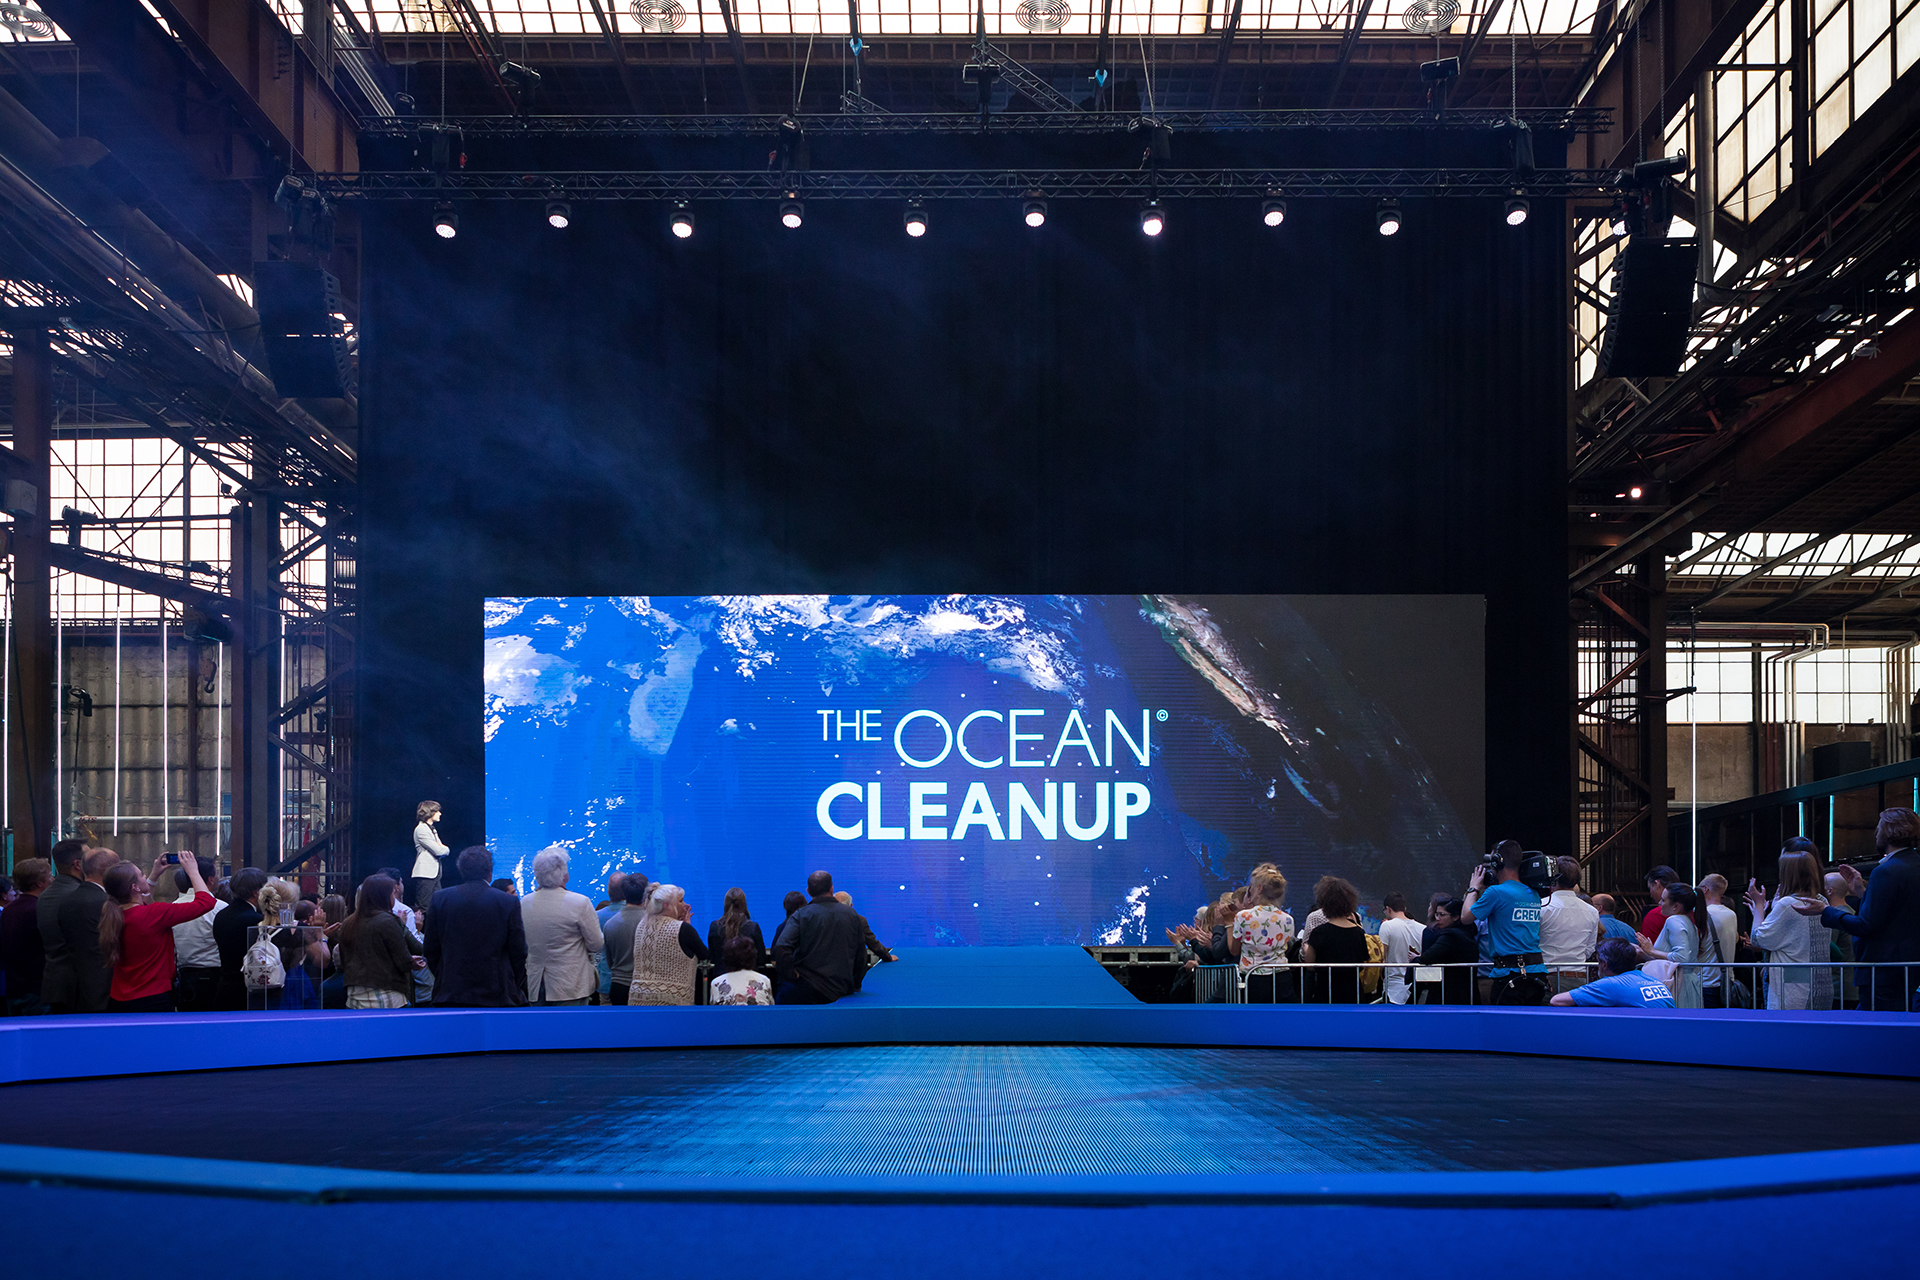 The Largest Ocean Cleanup project to roll out in 2018 Spearheaded by Boyan Stat, 22 year old. 